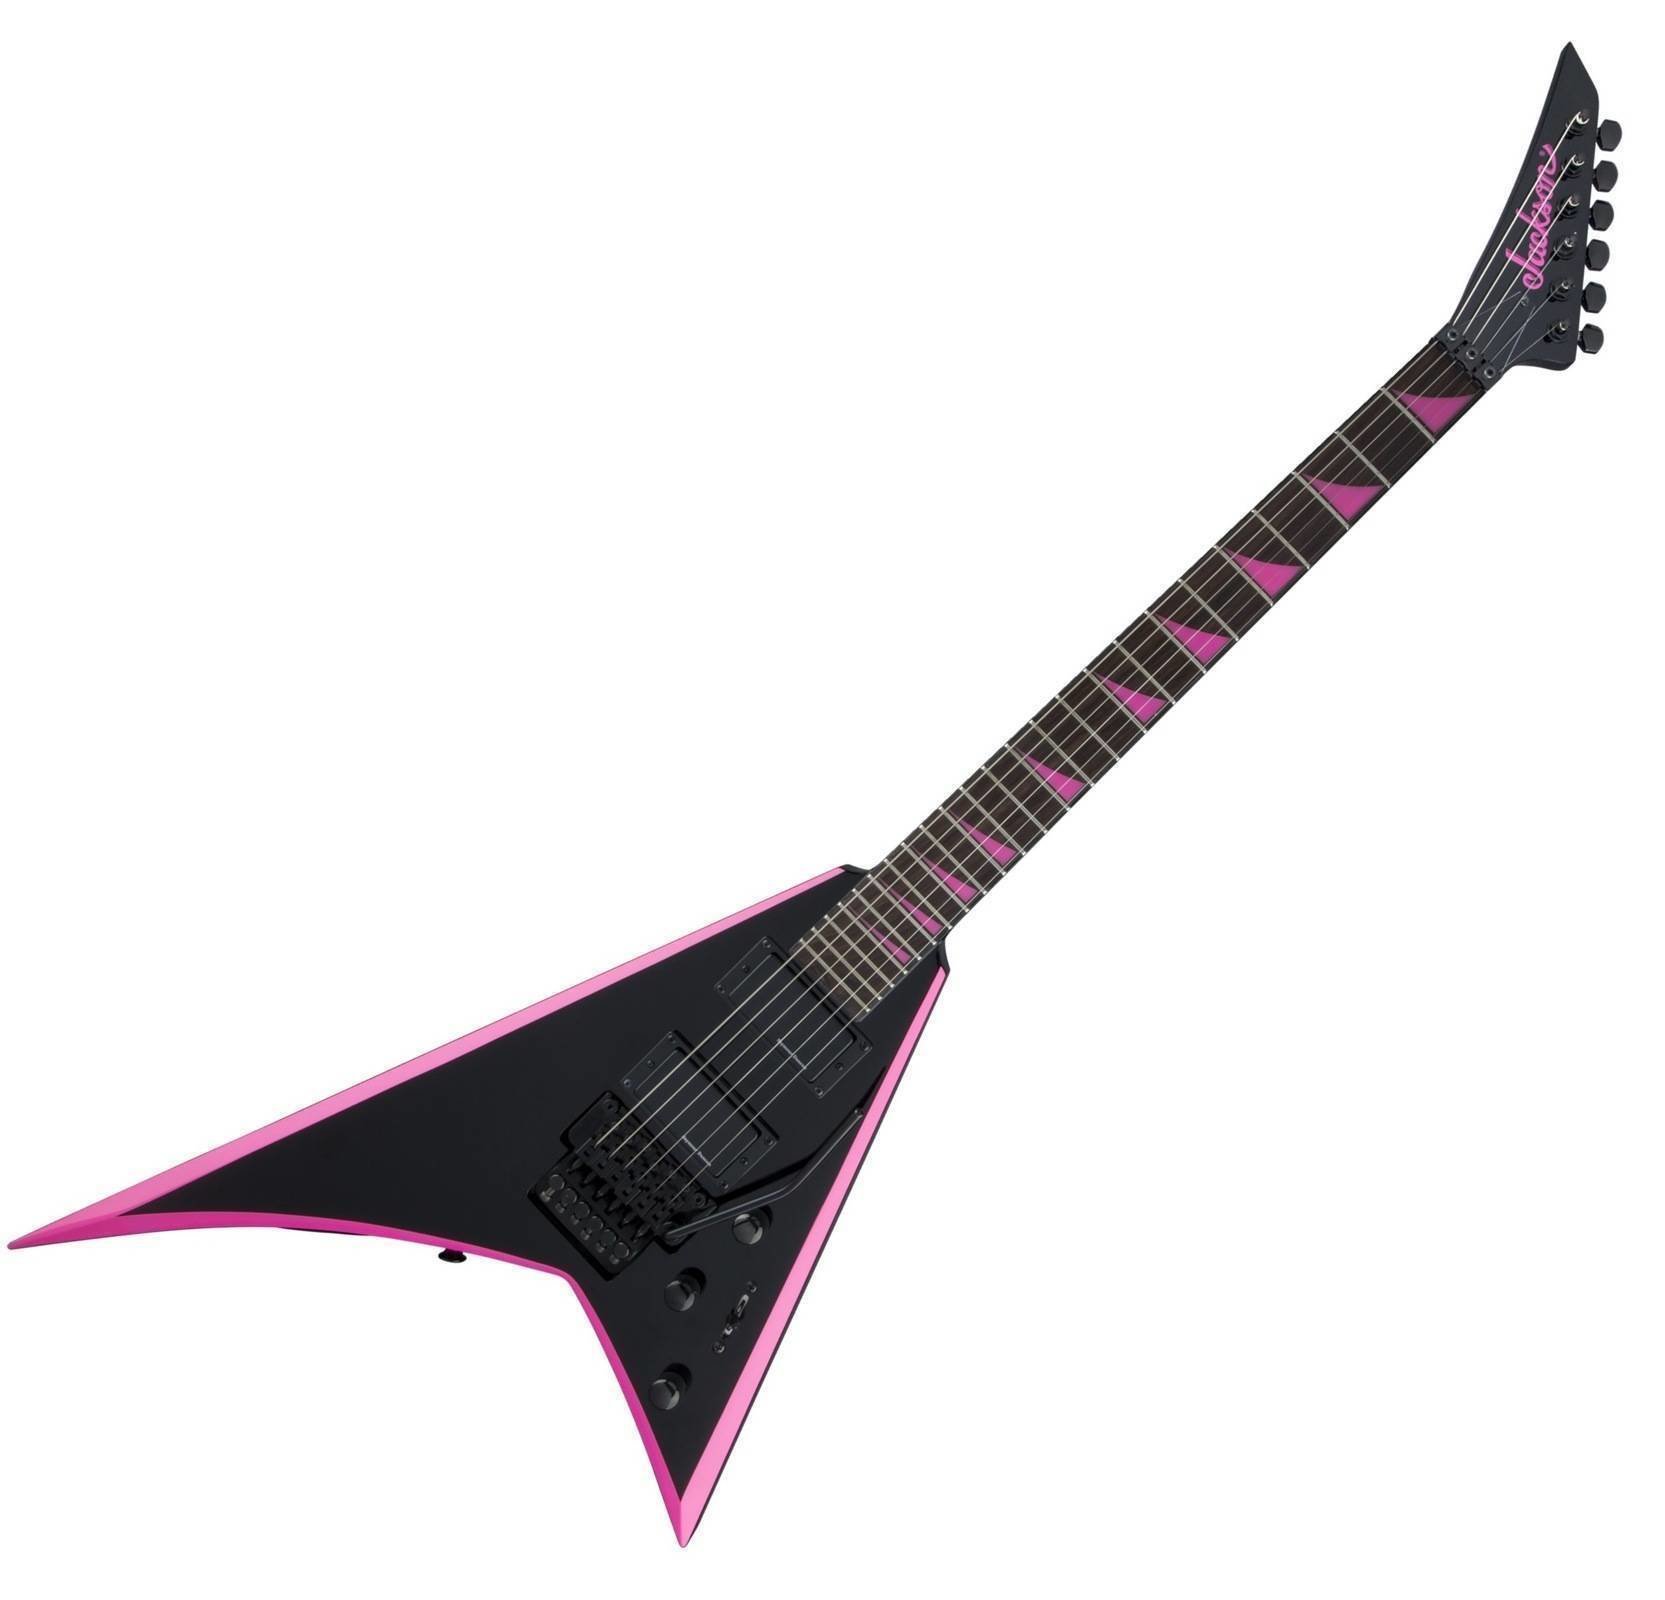 Electric guitar Jackson X Series Rhoads RRX24 IL Black with Neon Pink Bevels